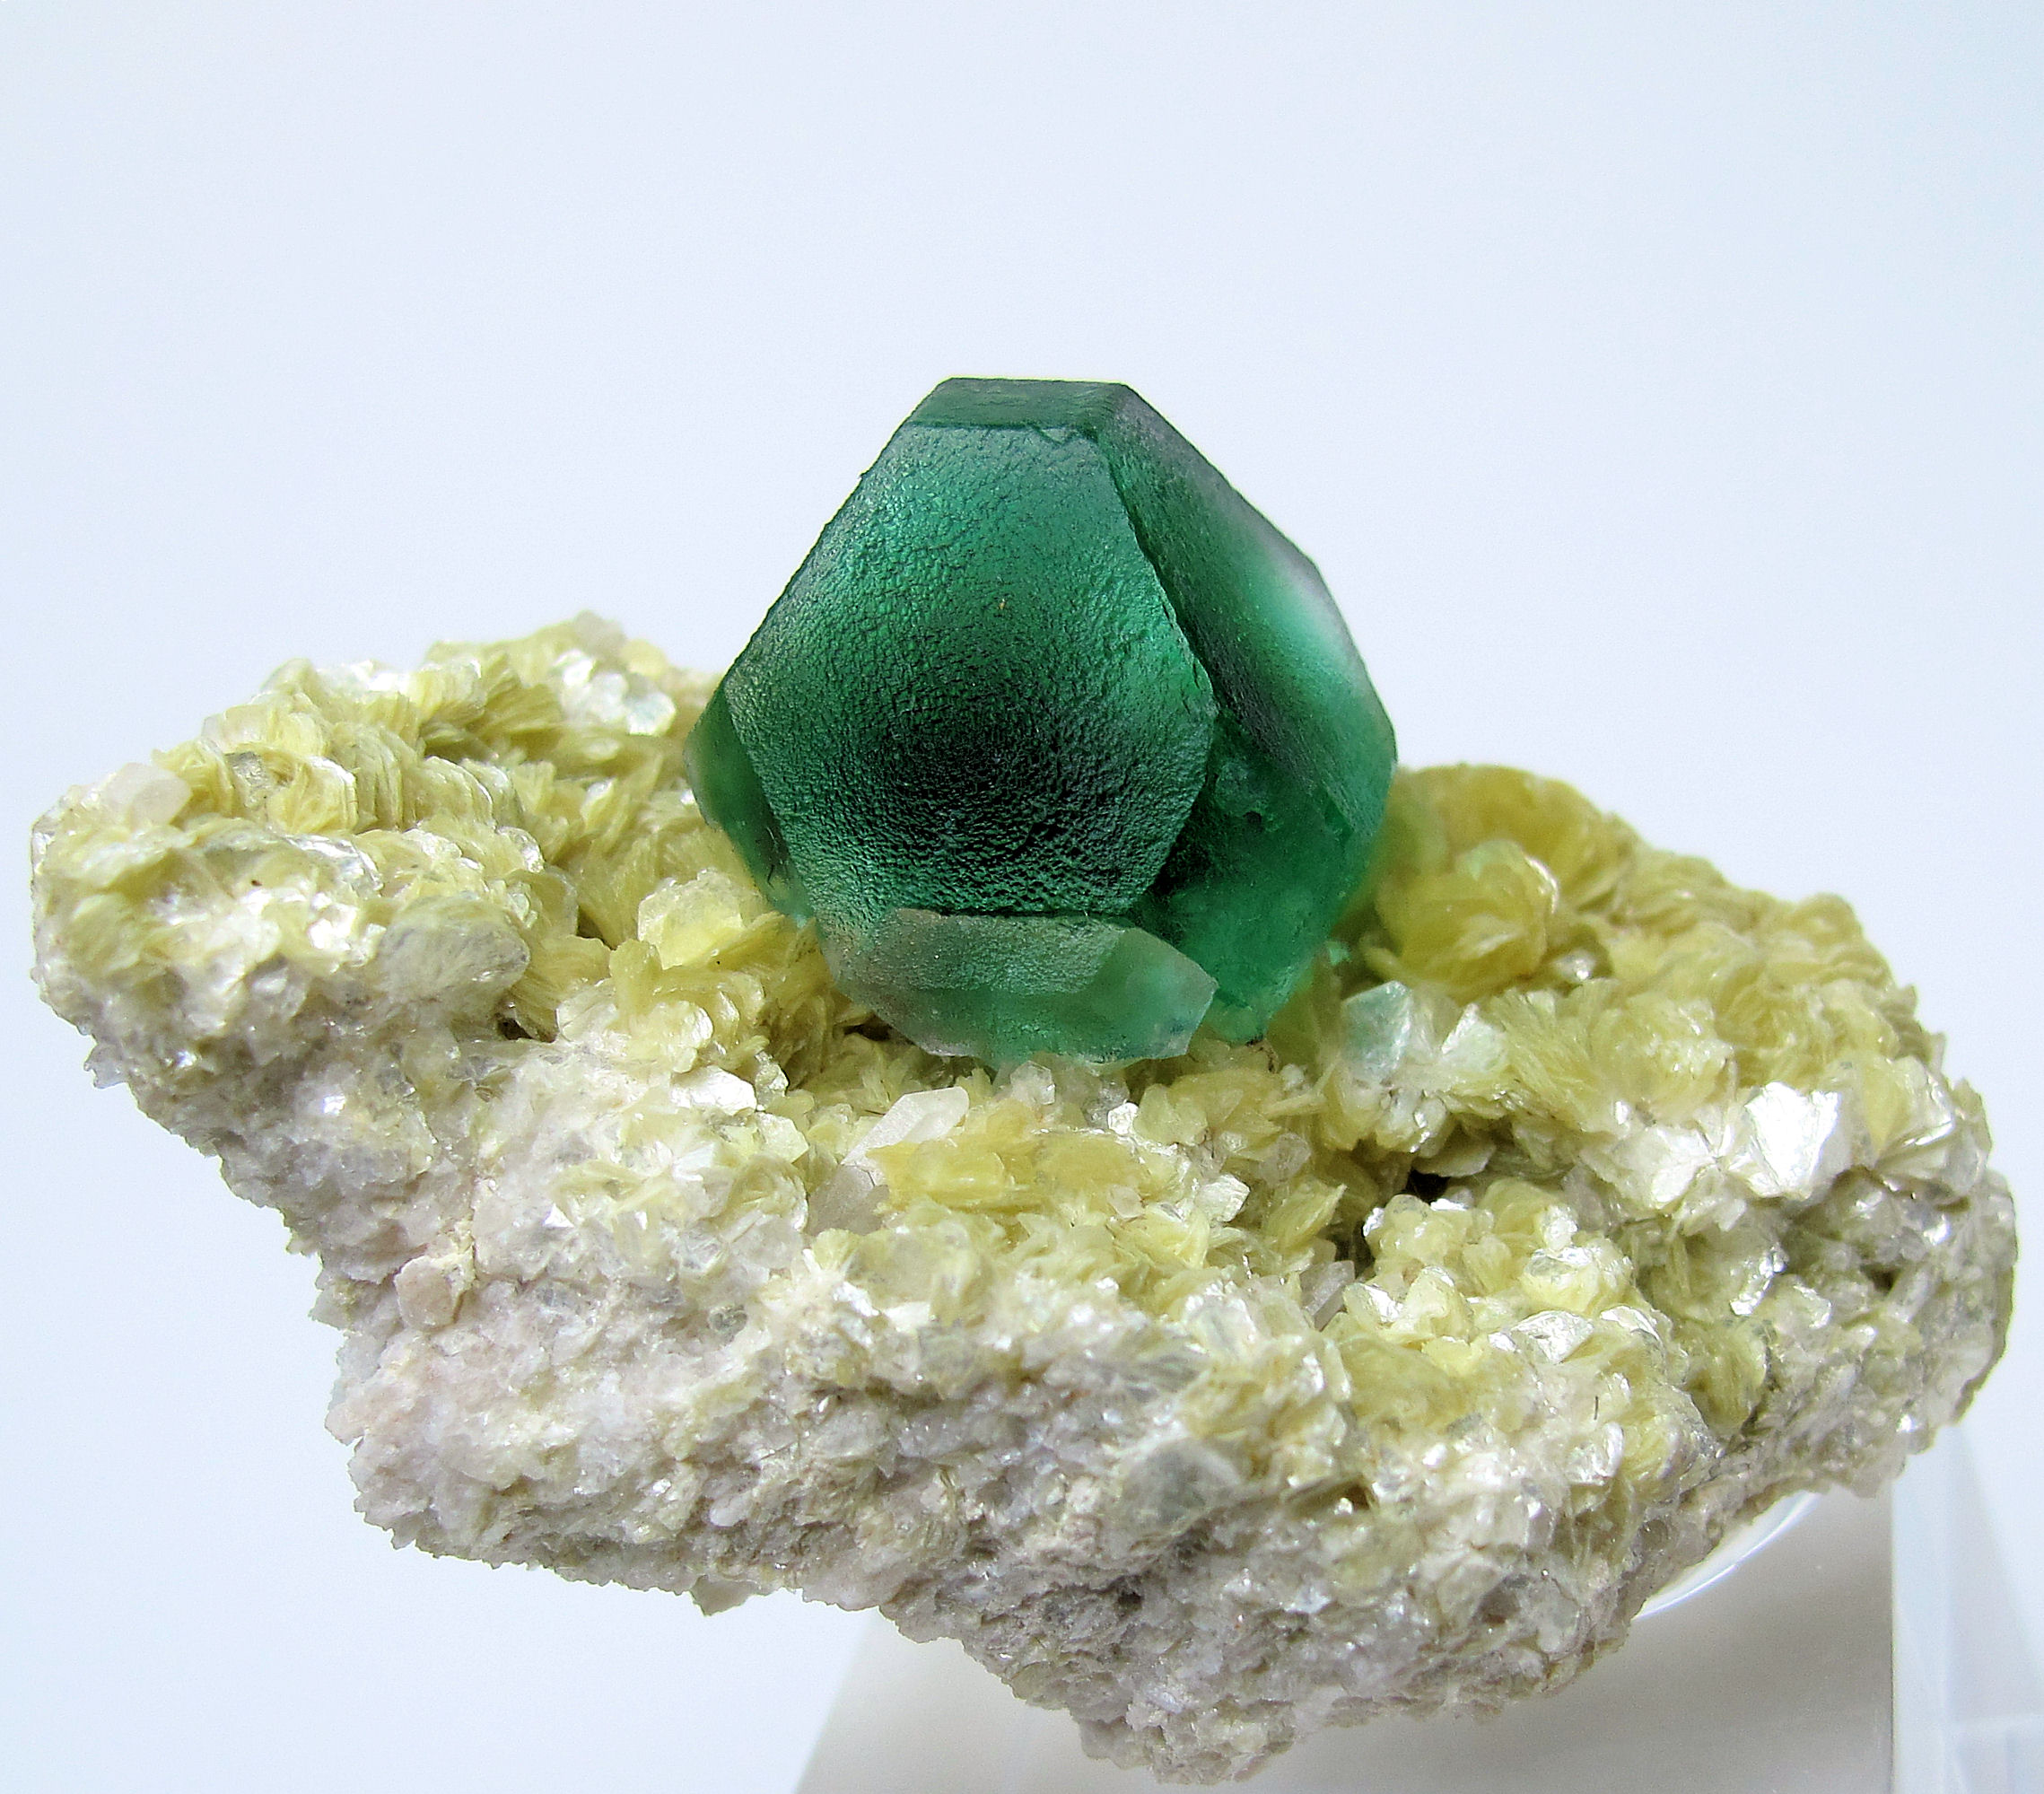 Fluorite montrant une forme cristalline complexe. © CarlesMillan, Wikimedia Commons, CC by-sa 3.0